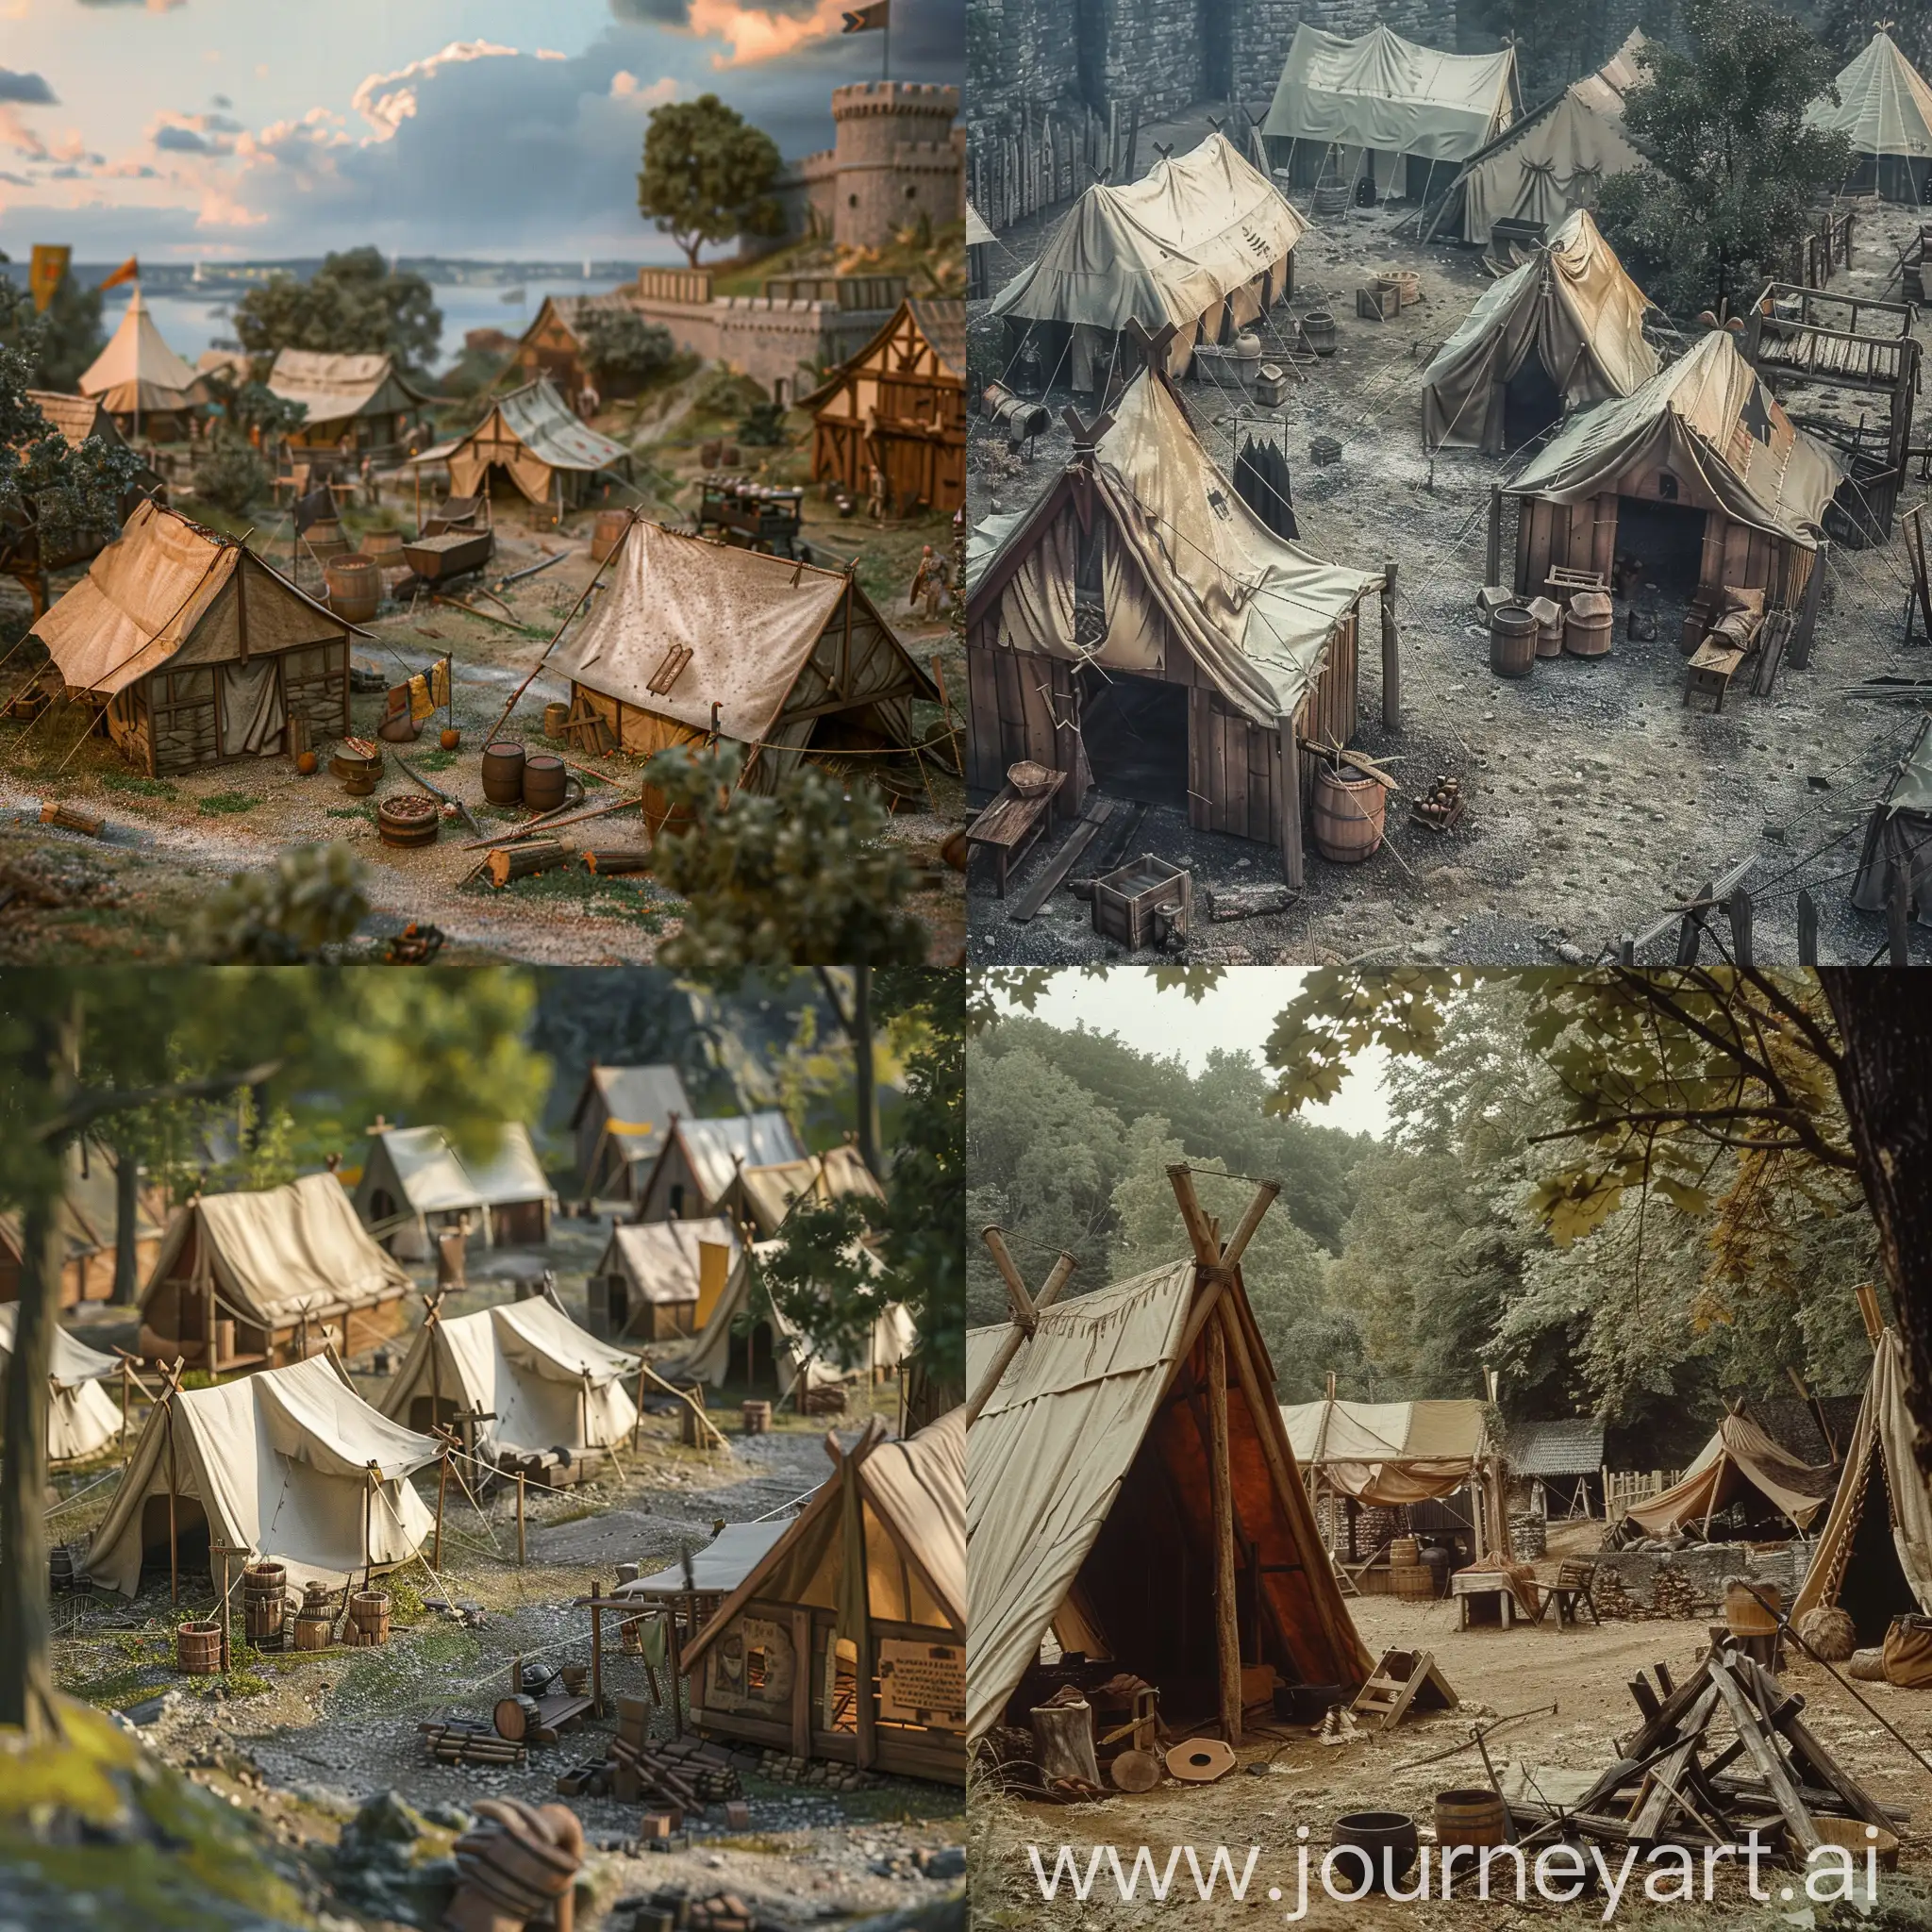 Medieval-Camp-with-Realistic-Tents-and-Constructions